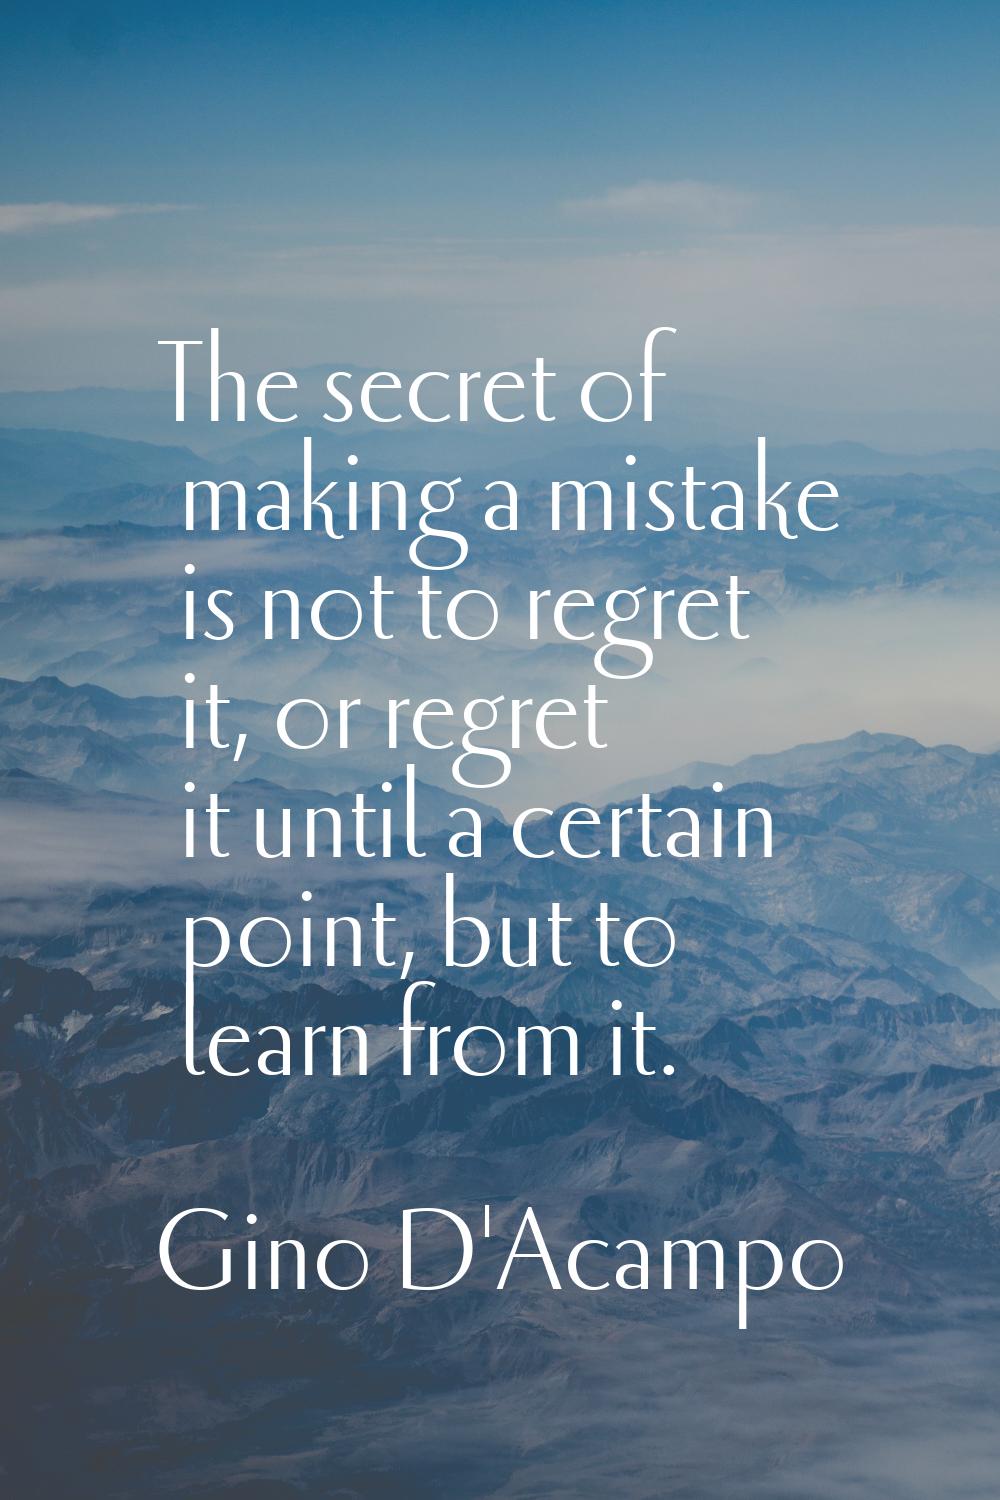 The secret of making a mistake is not to regret it, or regret it until a certain point, but to lear